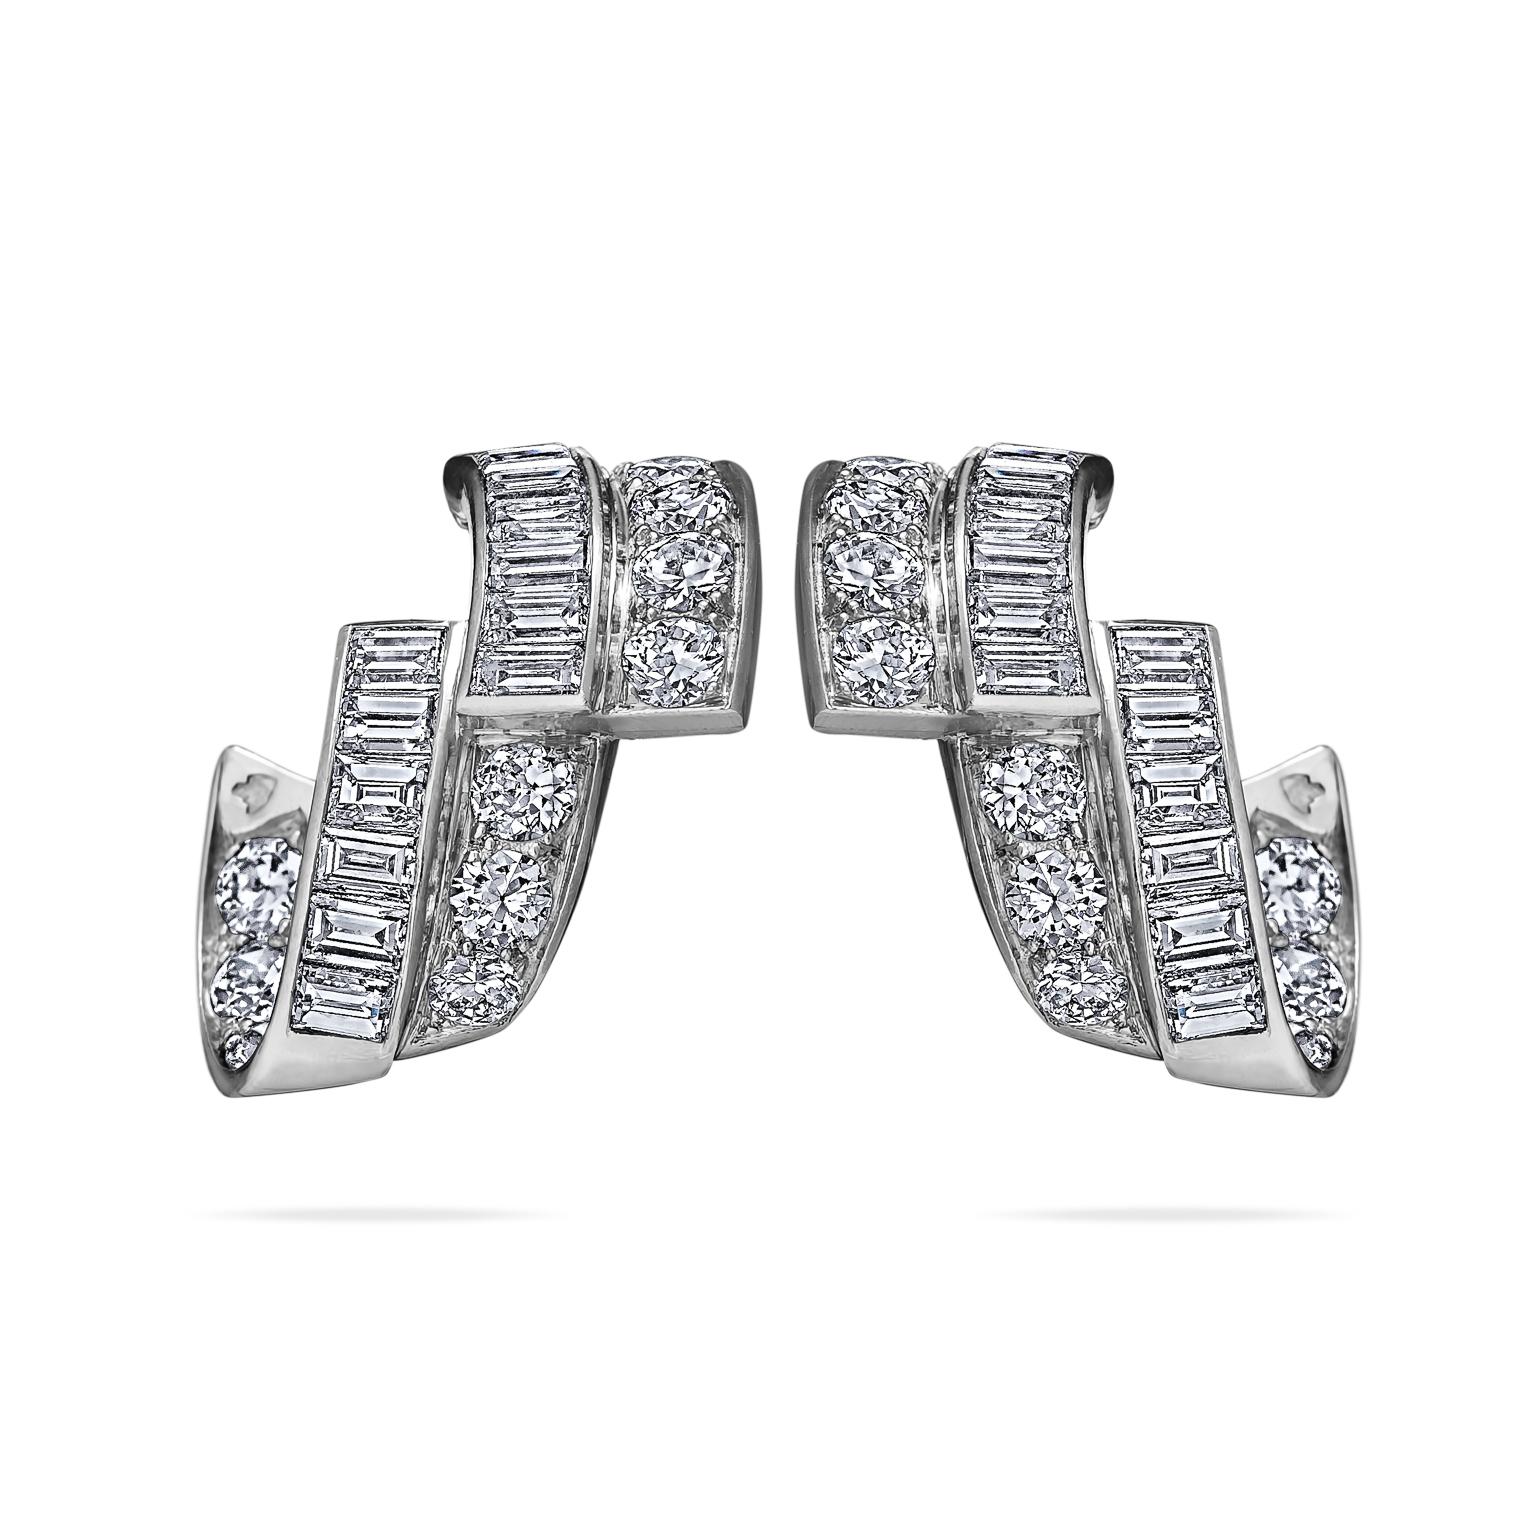 Ribbons of diamonds are endless in these one-of-a-kind French Art Deco earrings.  With 1.85 carats of cascading fiery baguette and old european cut diamonds mounted in platinum, these clip earrings evoke a bespoke era.  3/4